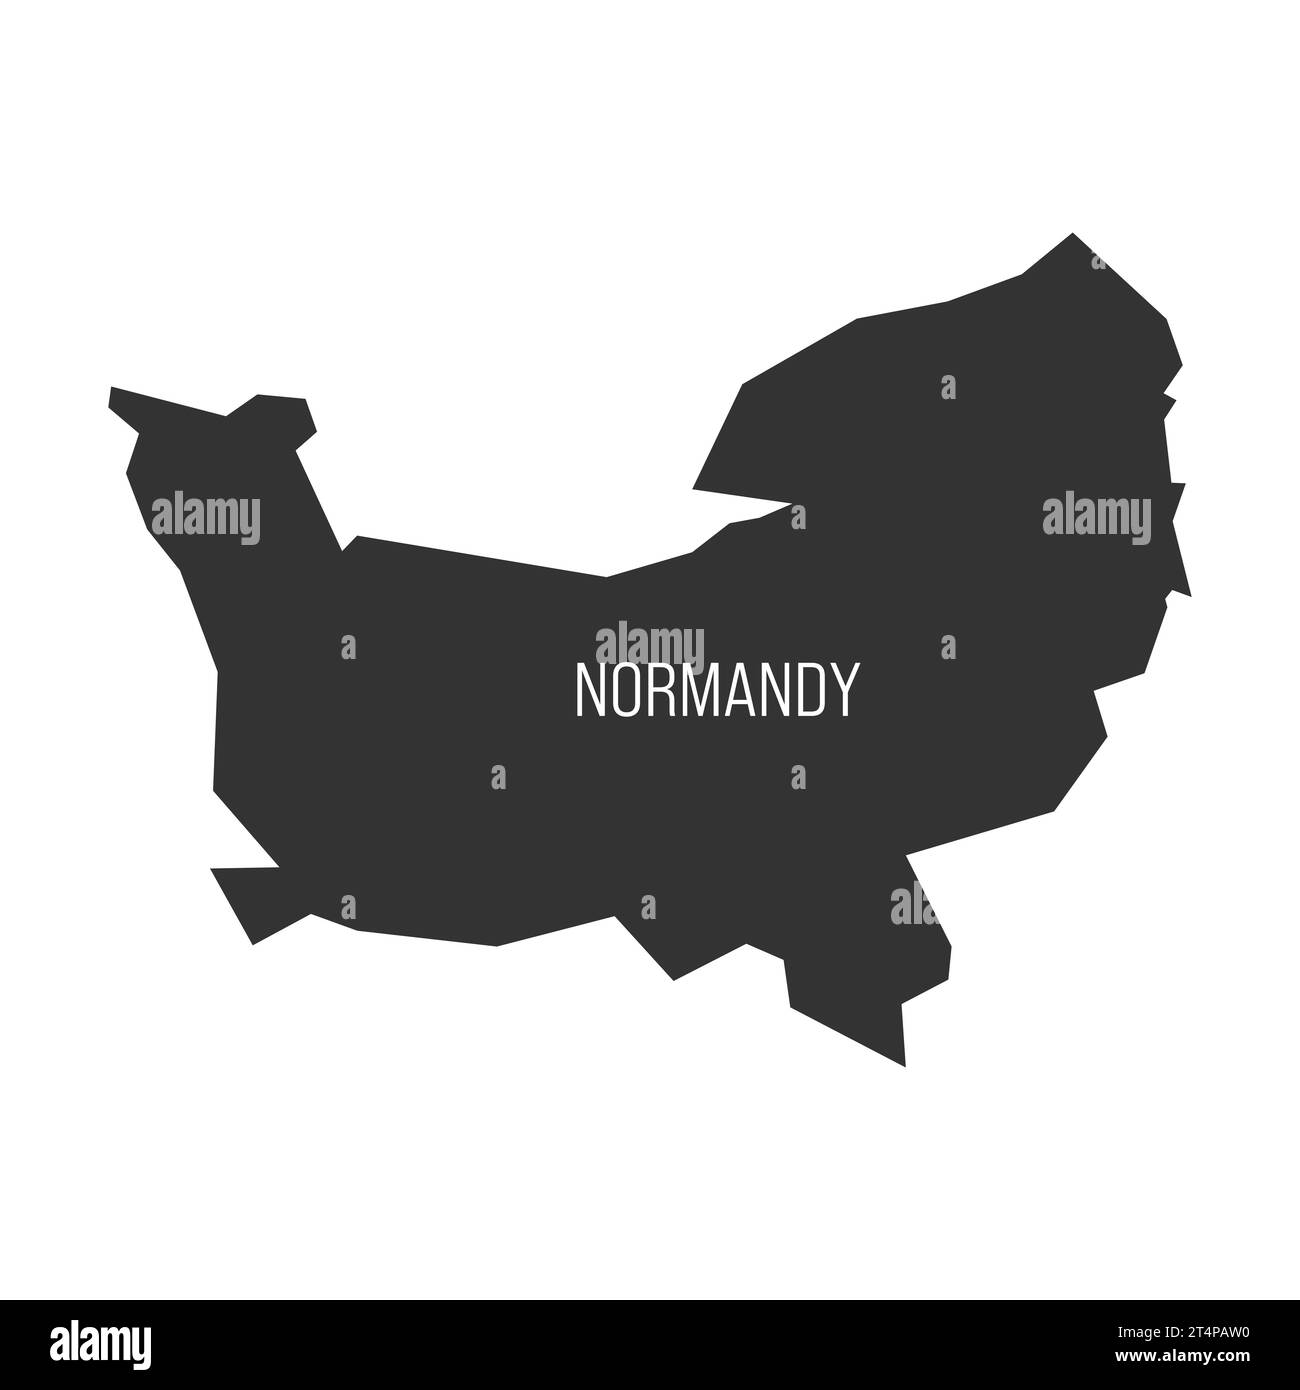 Normandy - map of administrative division, region, of France. Dark grey vector silhouette. Stock Vector